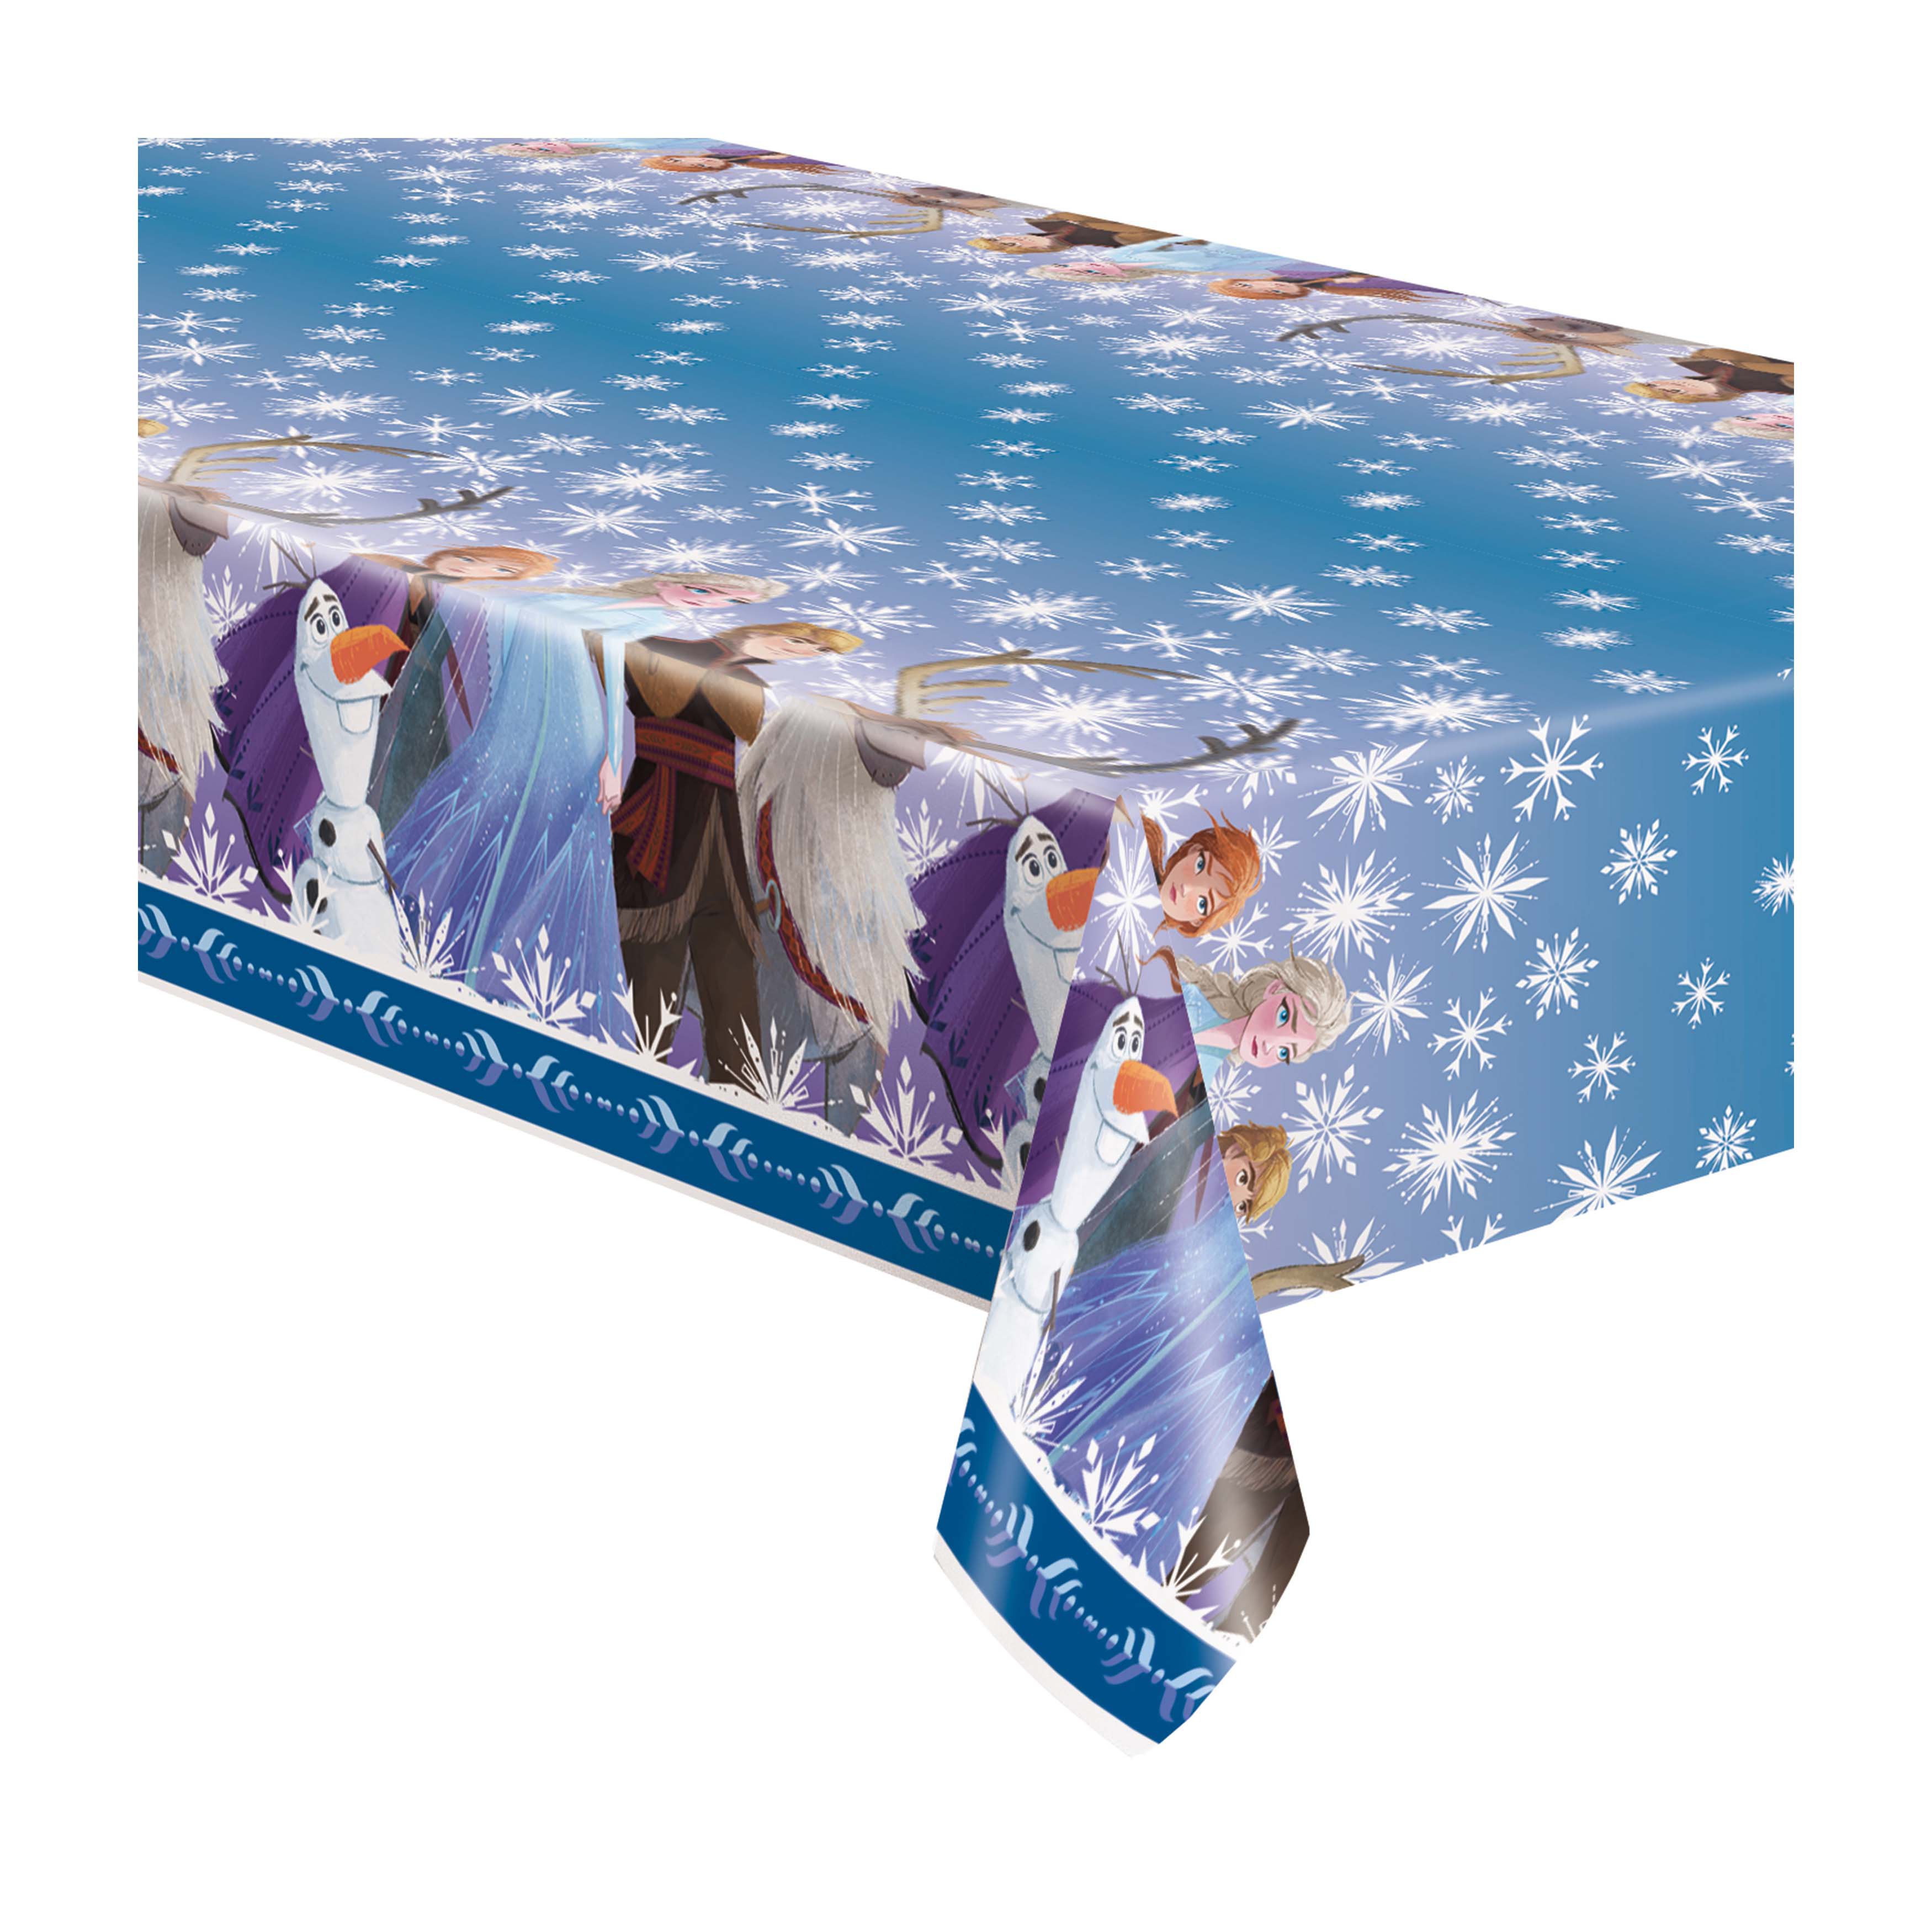 FROZEN SNOWFLAKE EX-LARGE PLASTIC TABLE COVER Birthday Party Supplies 